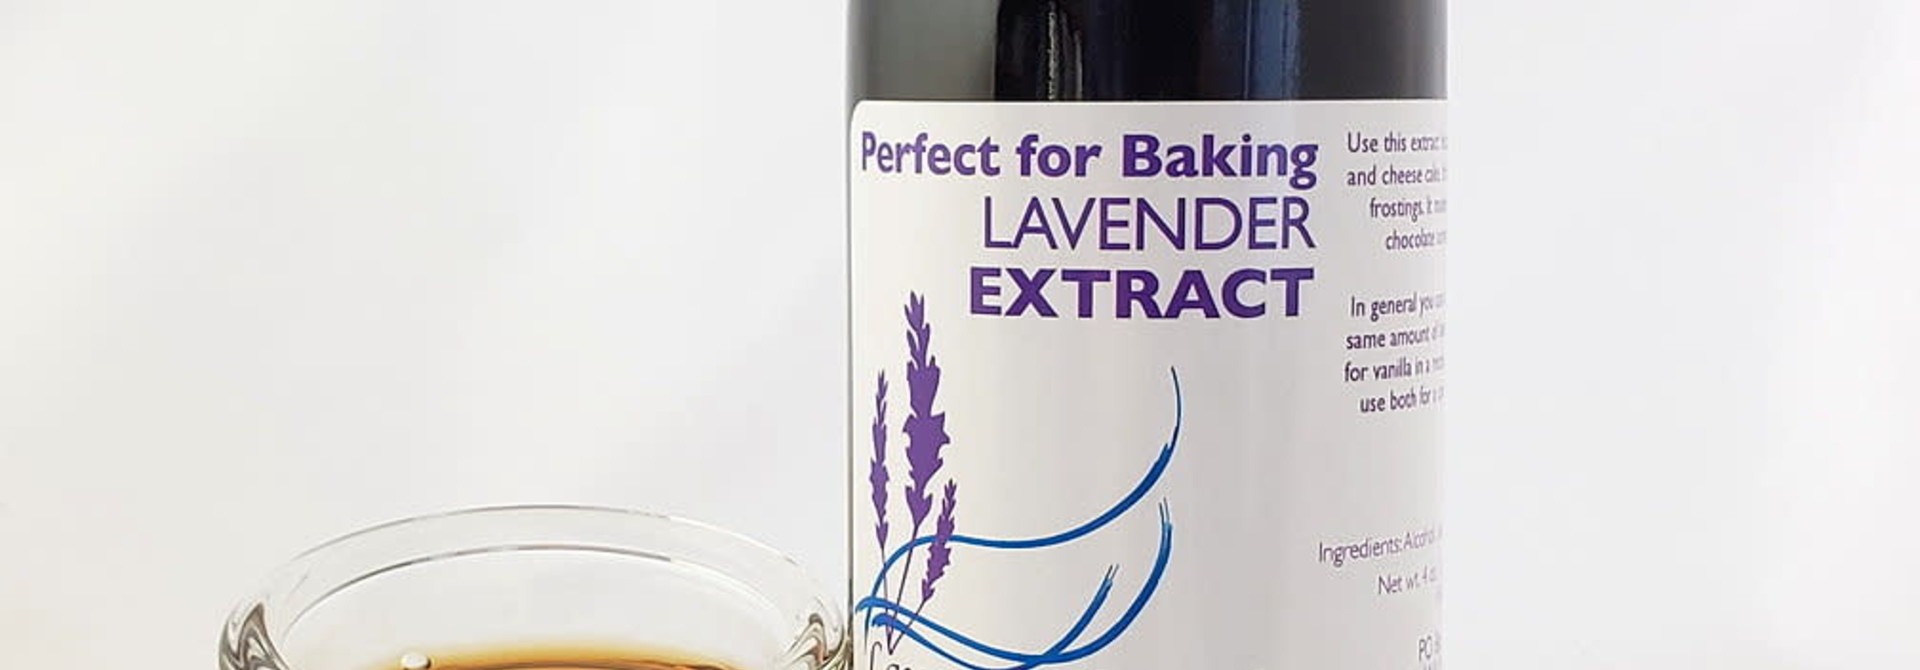 Lavender Baking Extract Large